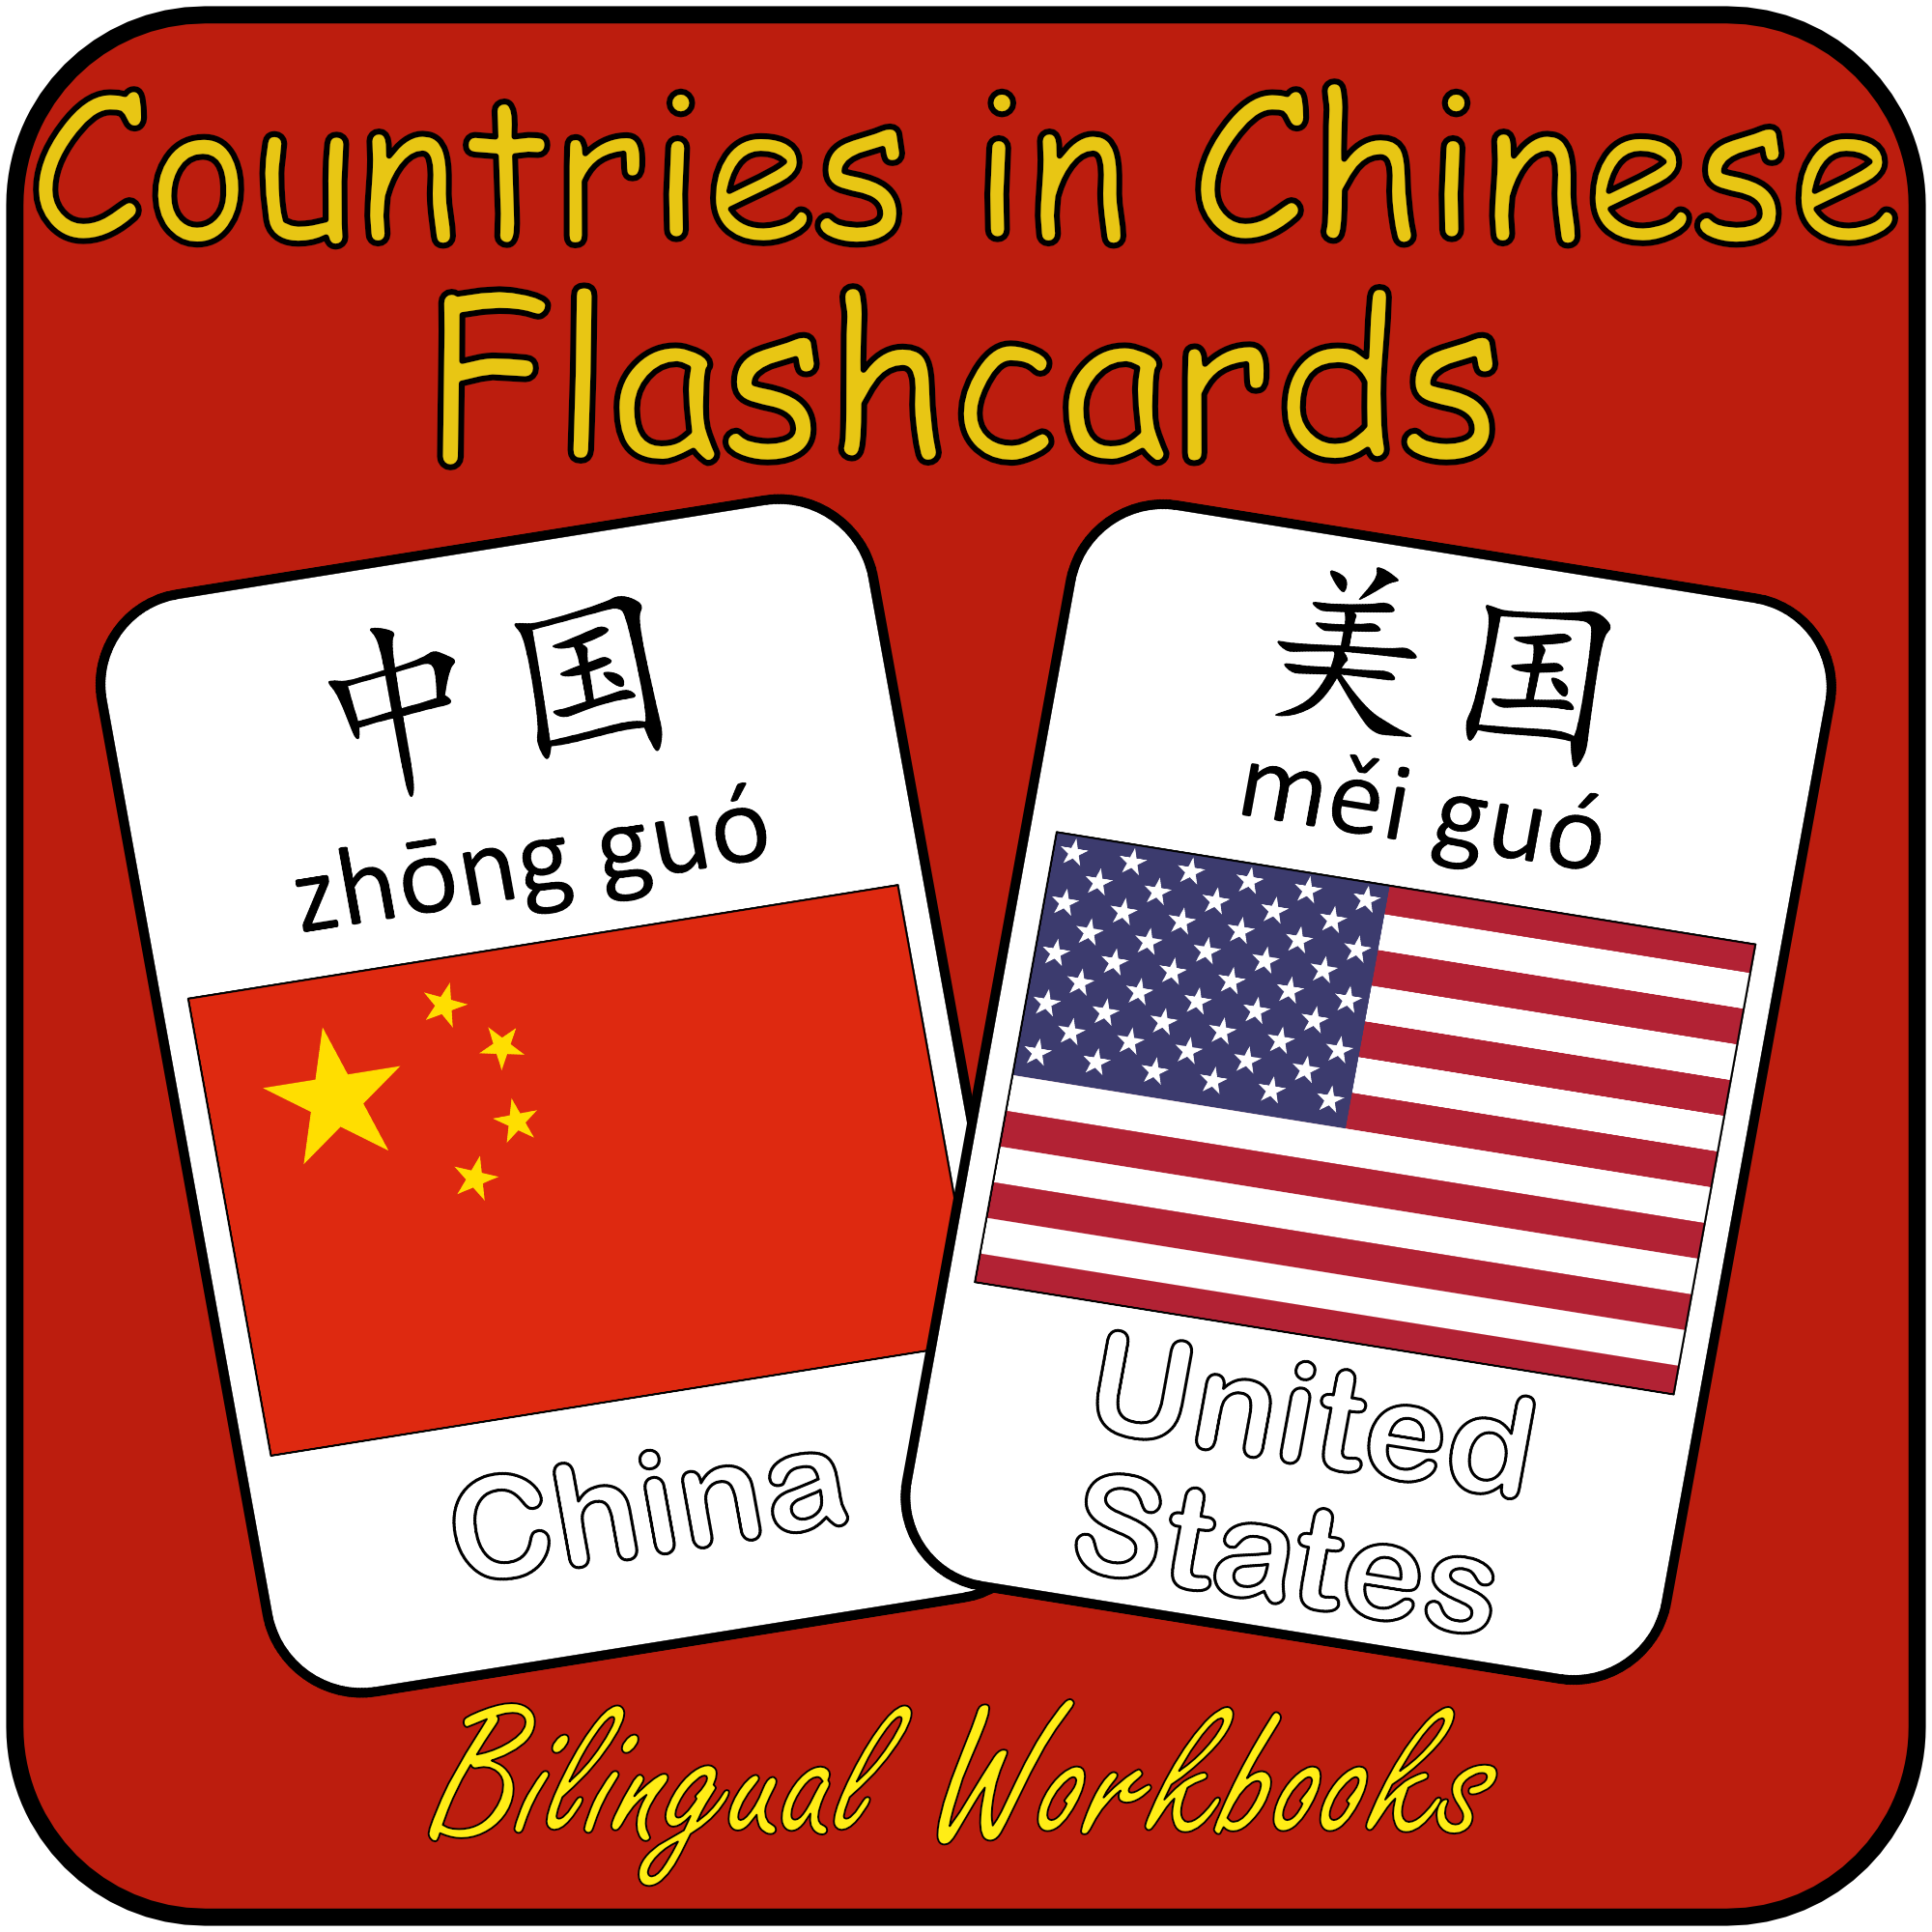 Mandarin Chinese Countries of the World Geography Flashcards - 101 Country Flag flash cards with English name, Chinese Character and Pinyin